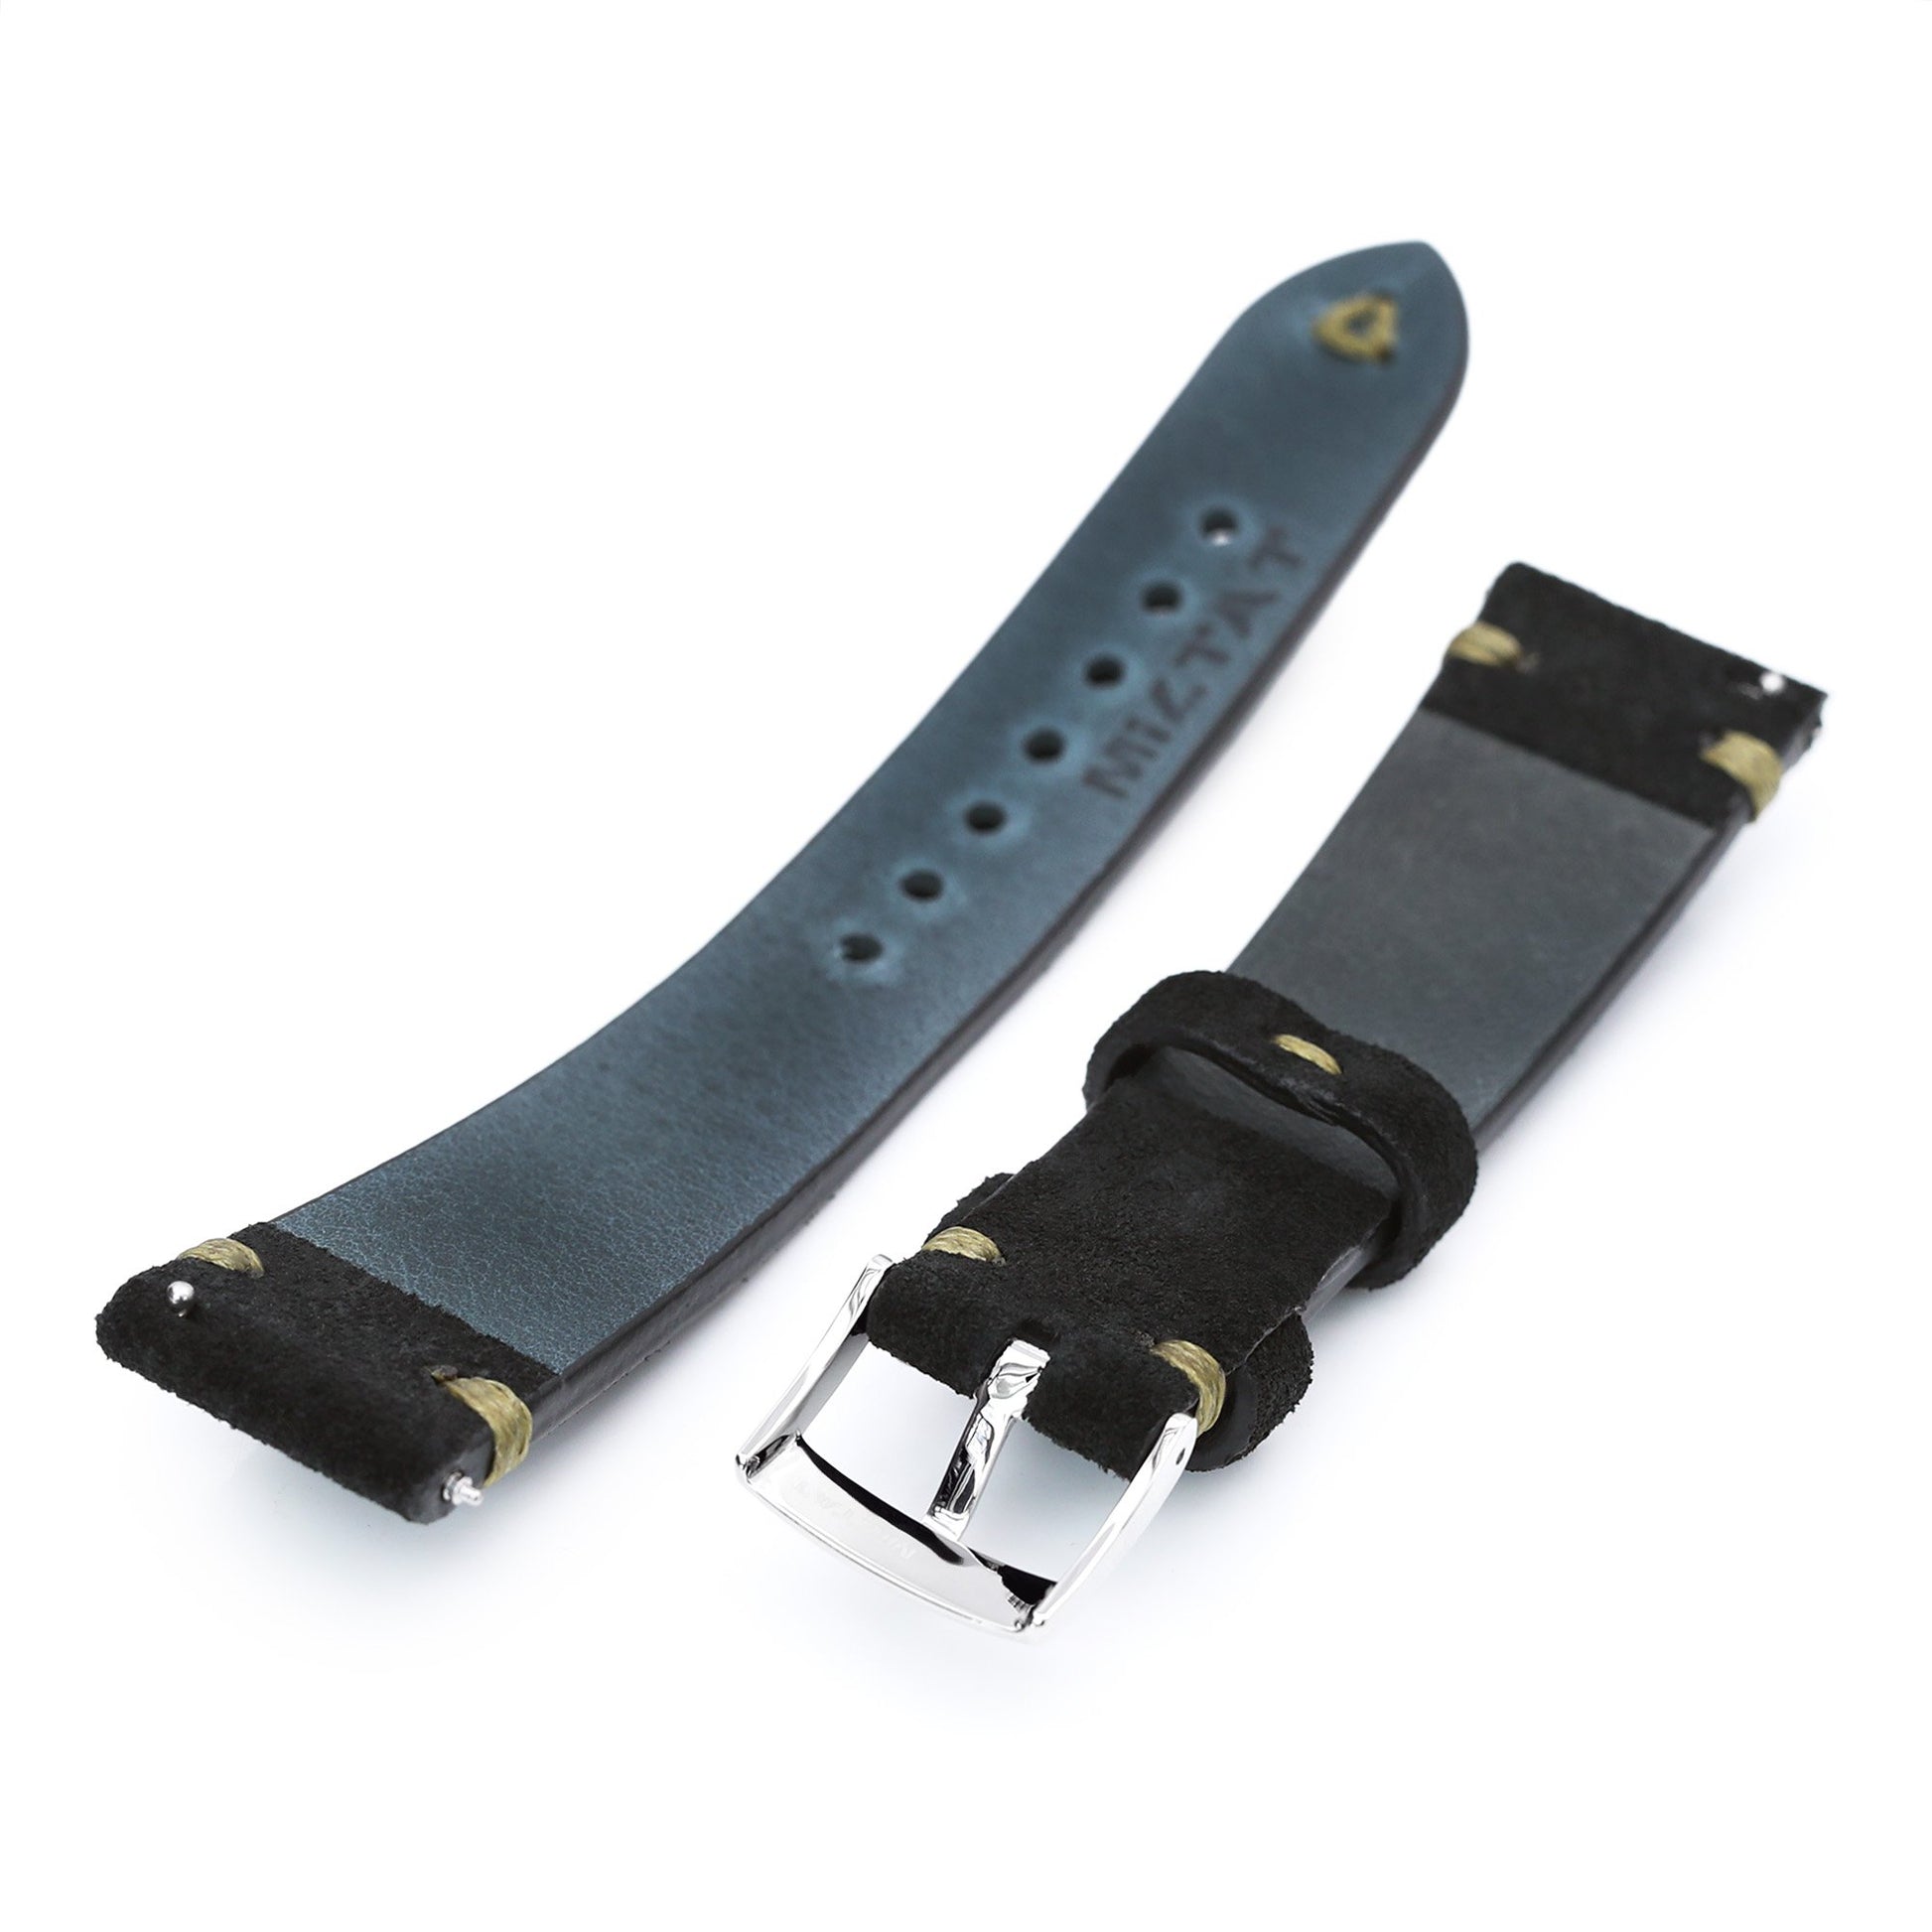 20mm Black Quick Release Italian Suede Leather Watch Strap | Strapcode